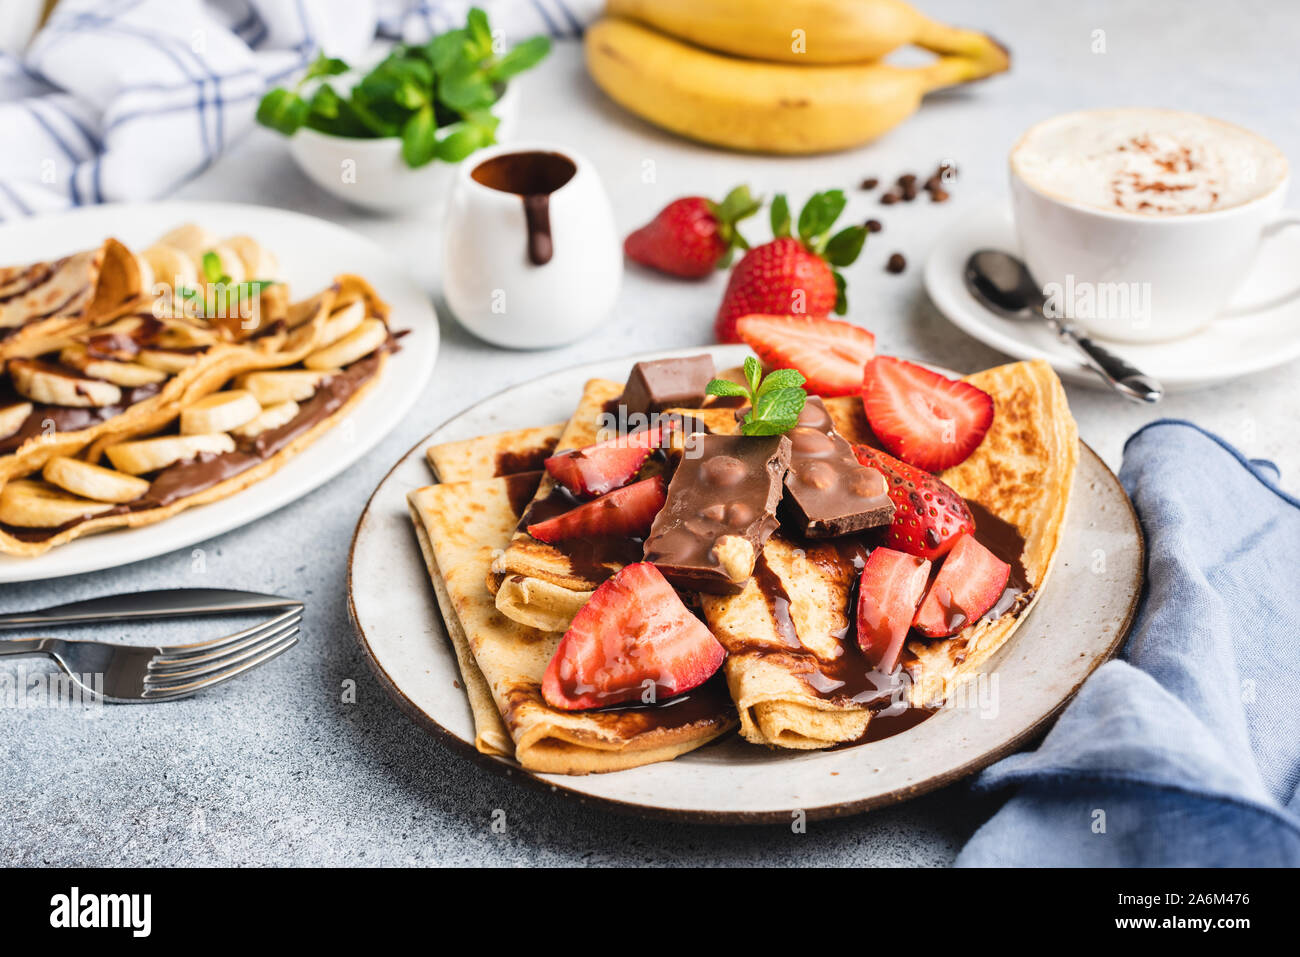 Crepes with chocolate, strawberry and banana. Tasty sweet food, dessert served in restaurant. Blini with chocolate syrup and fruits Stock Photo